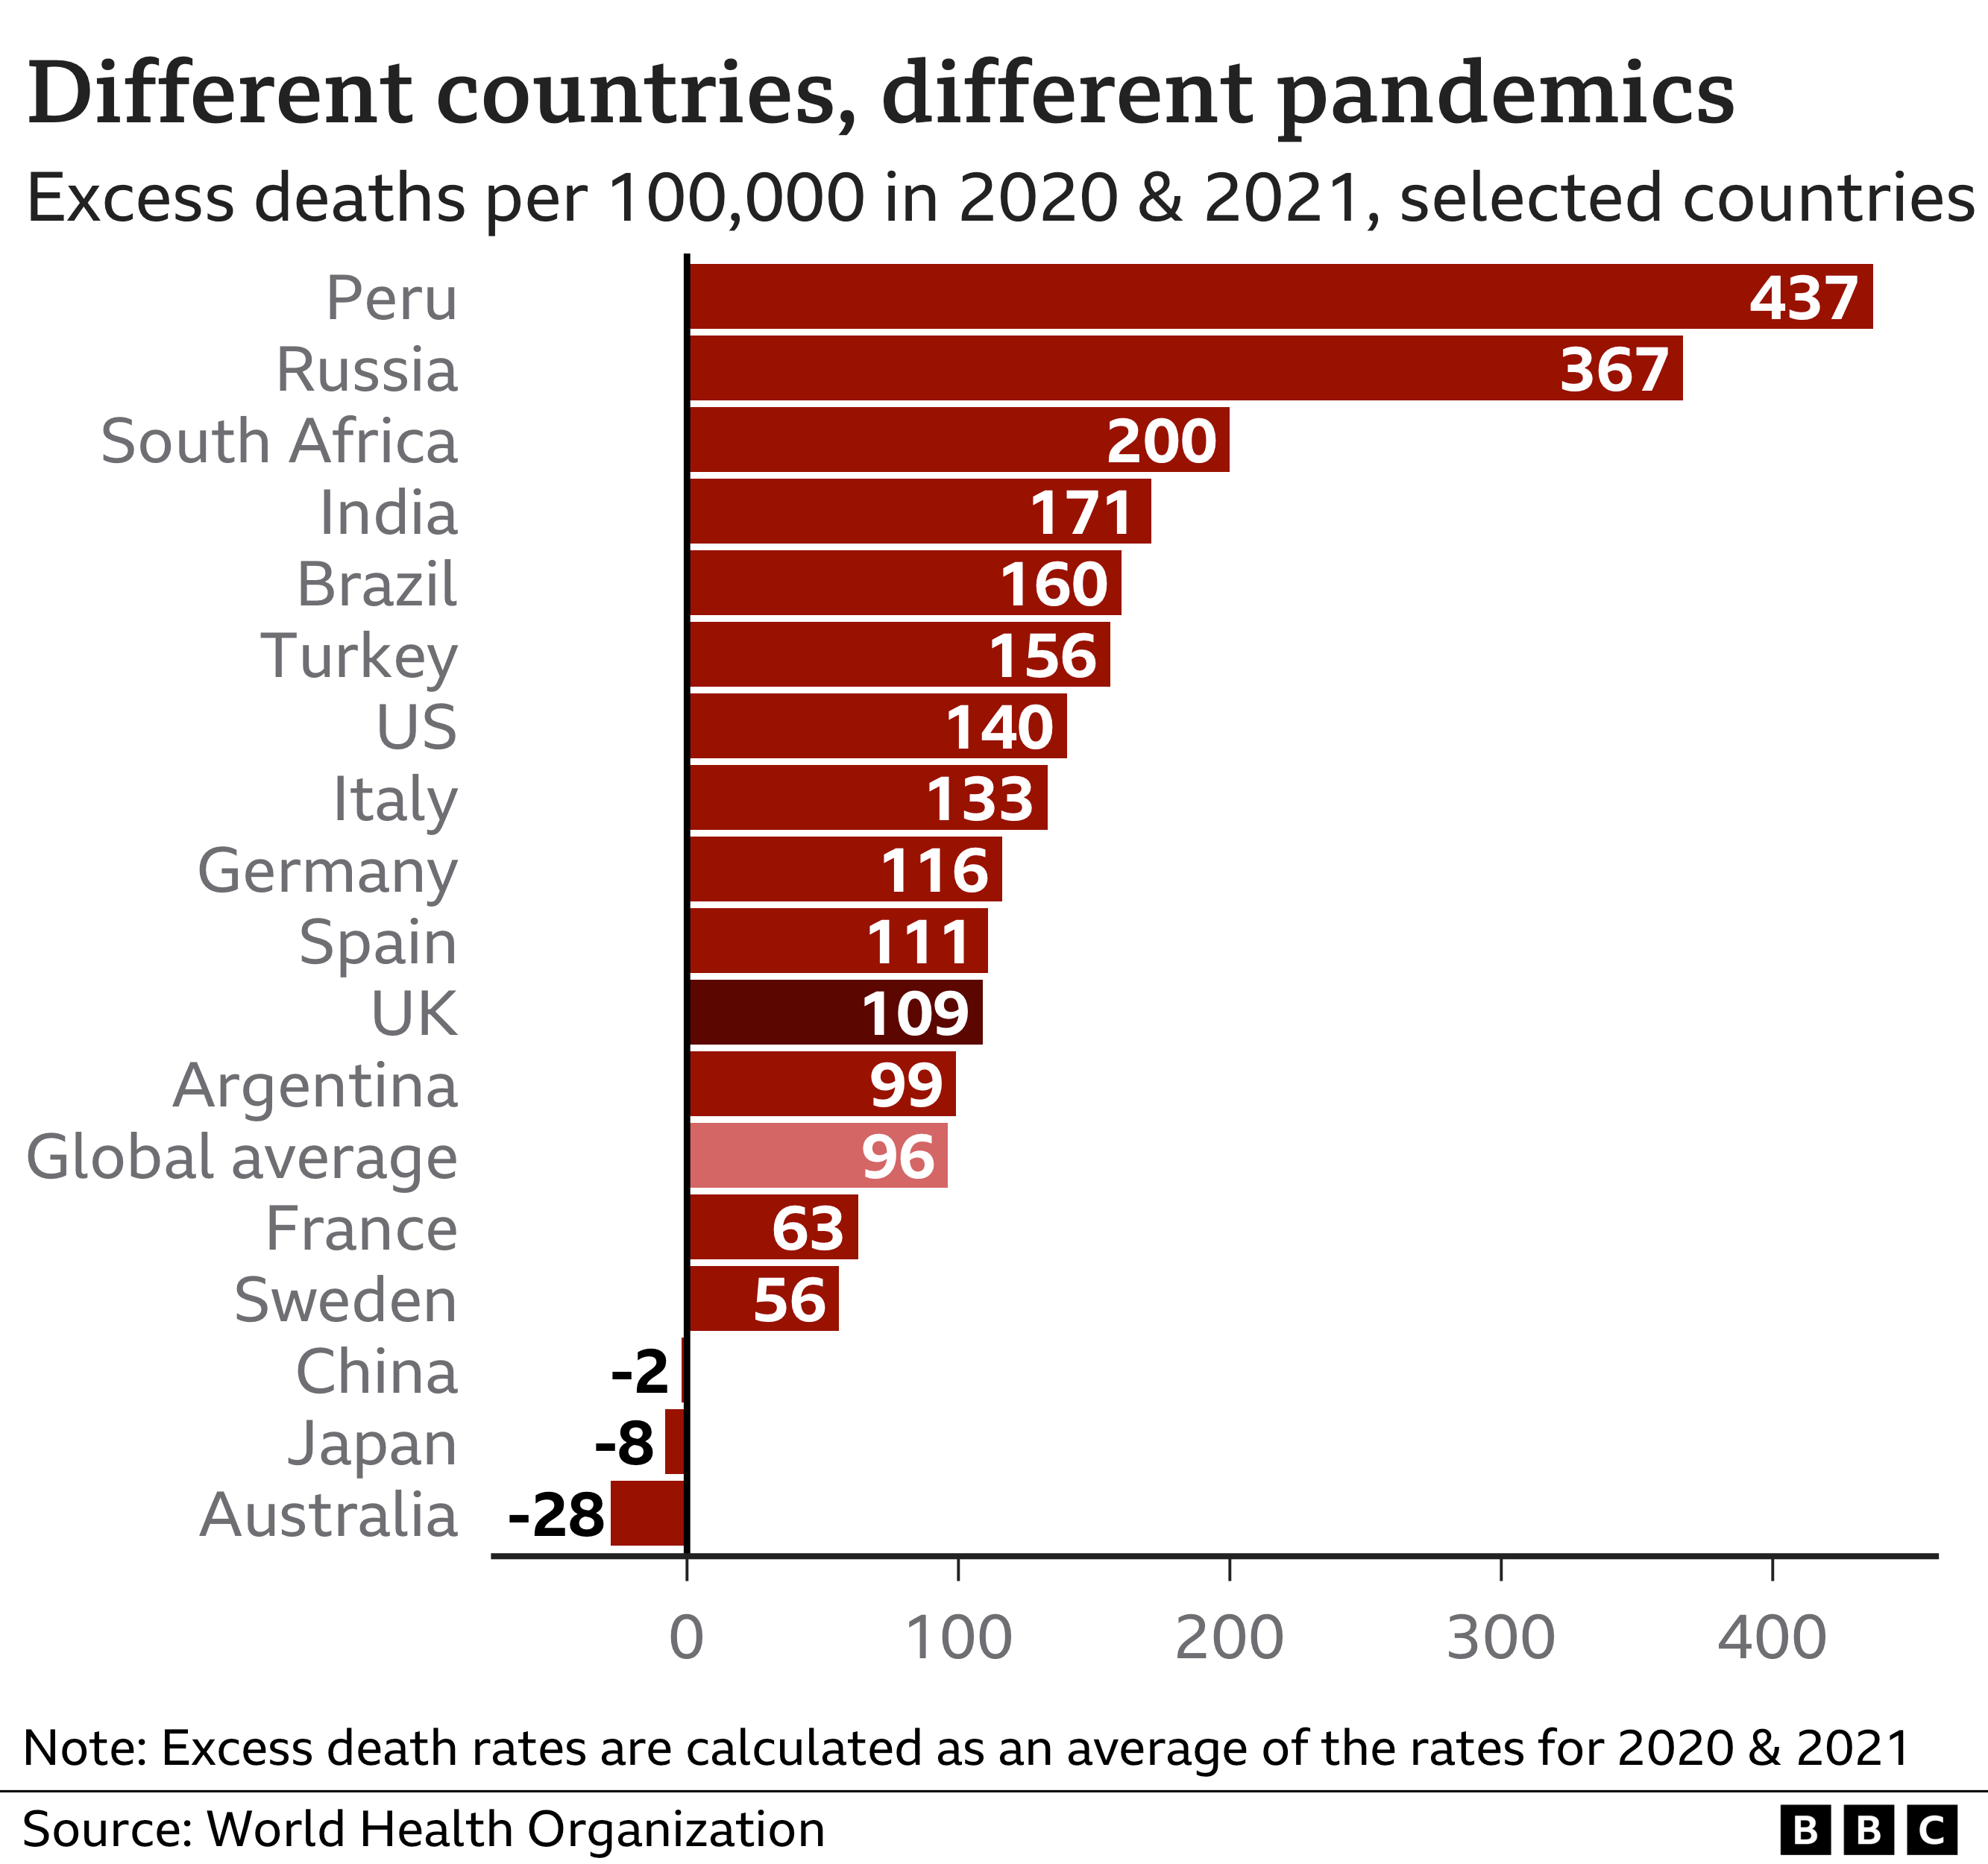 Graphic showing the excess deaths rate by country based on WHO estimates, with Peru at the top on 437, Russia on 367 and South Africa on 200. The global average is 96 and China, Japan and Australia show up as having registered negative excess deaths